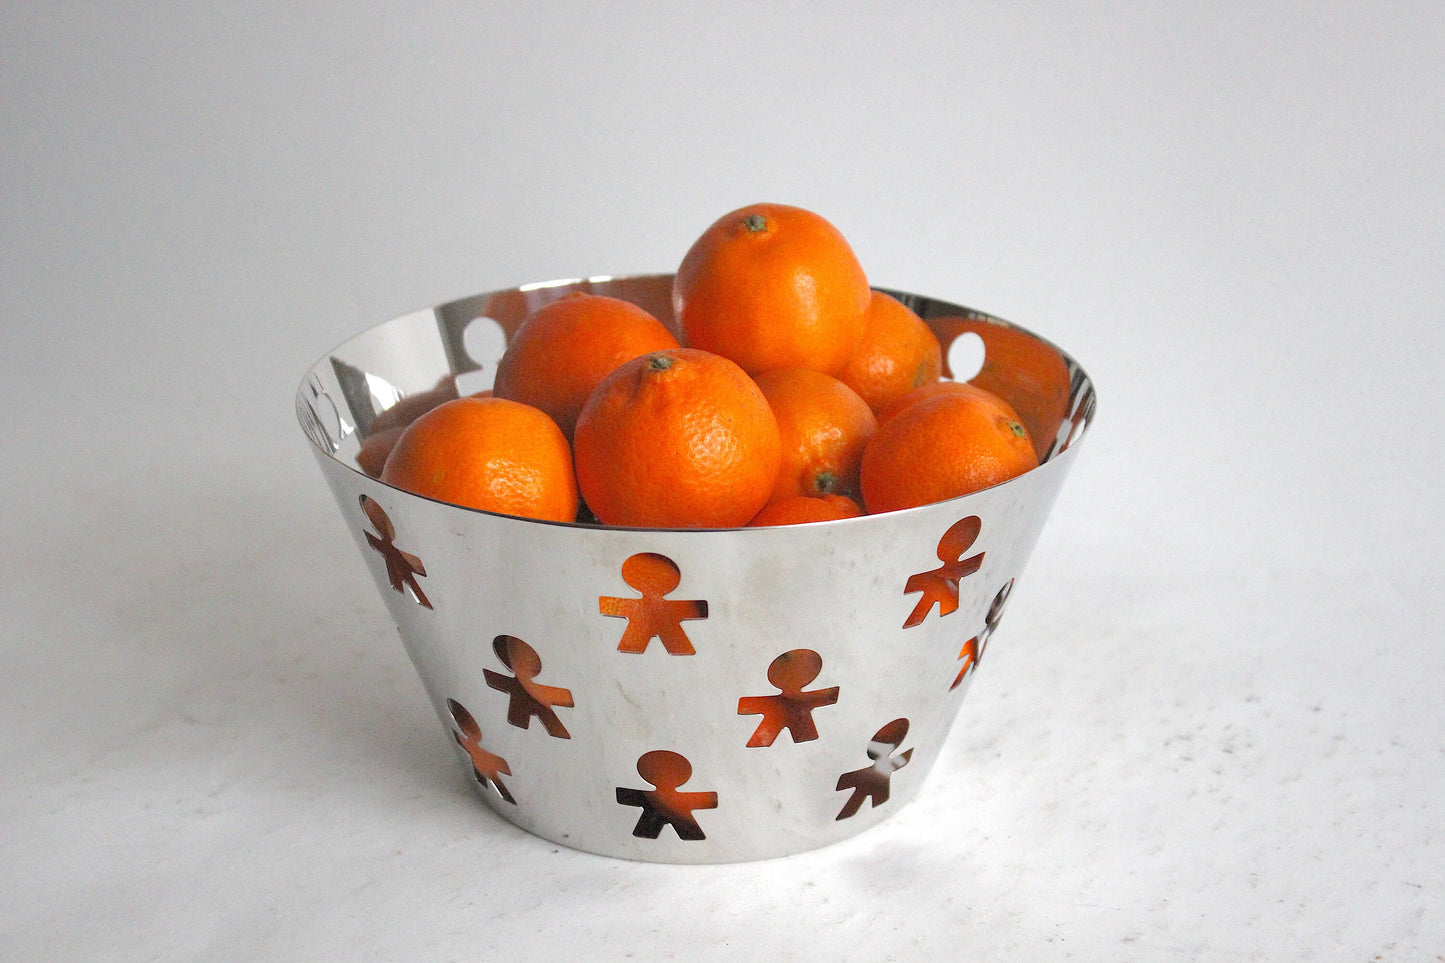 Alessi Girotondo Stainless Steel Fruit Bowl XL. King Kong Design. New old Stock with original Packaging. 18/10 stainless steel. Italy 1980s